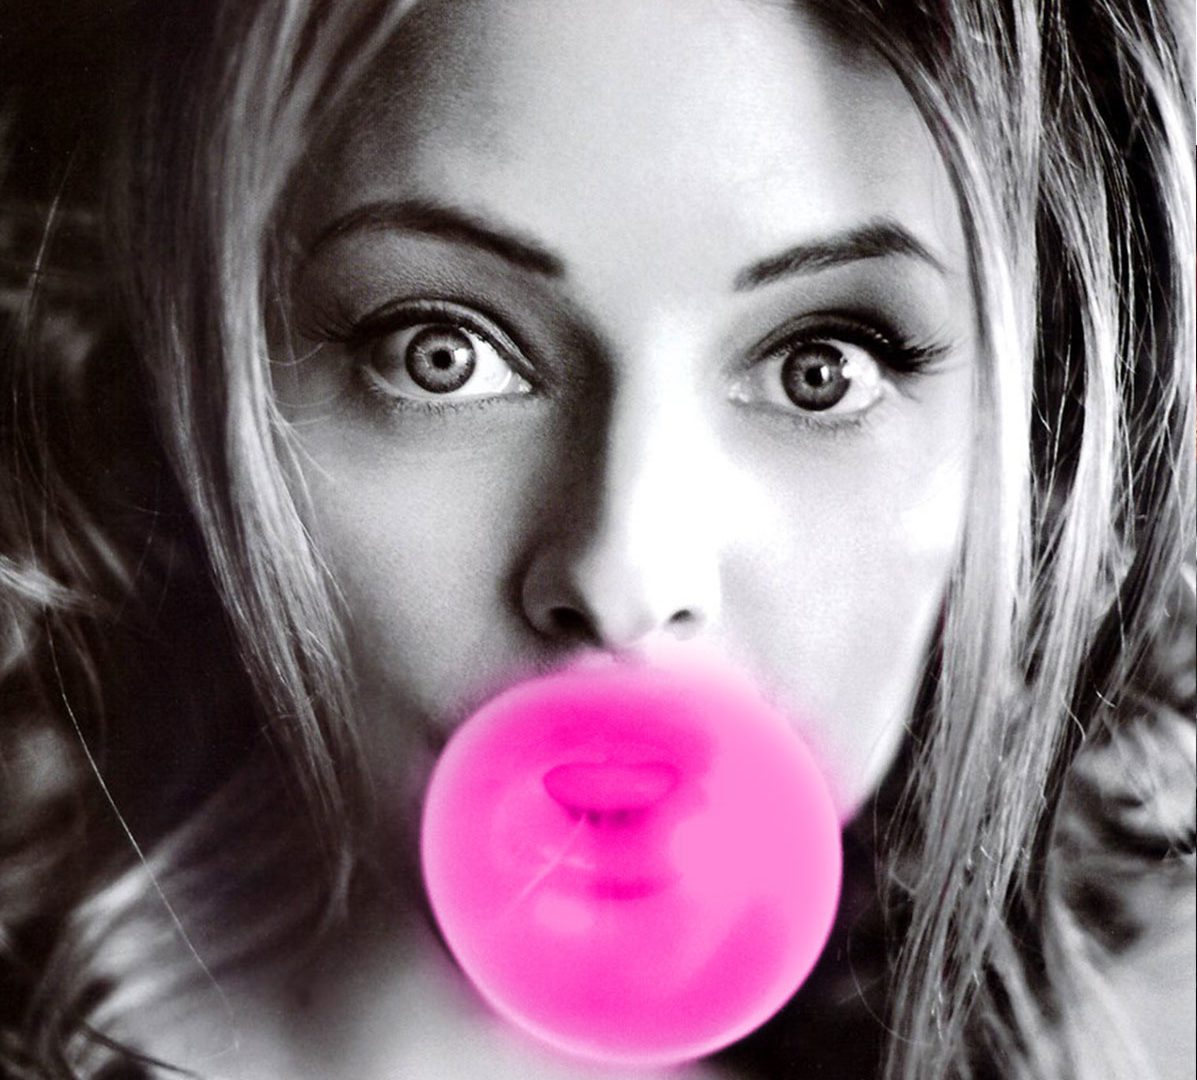 A woman with pink bubble gum in her mouth.